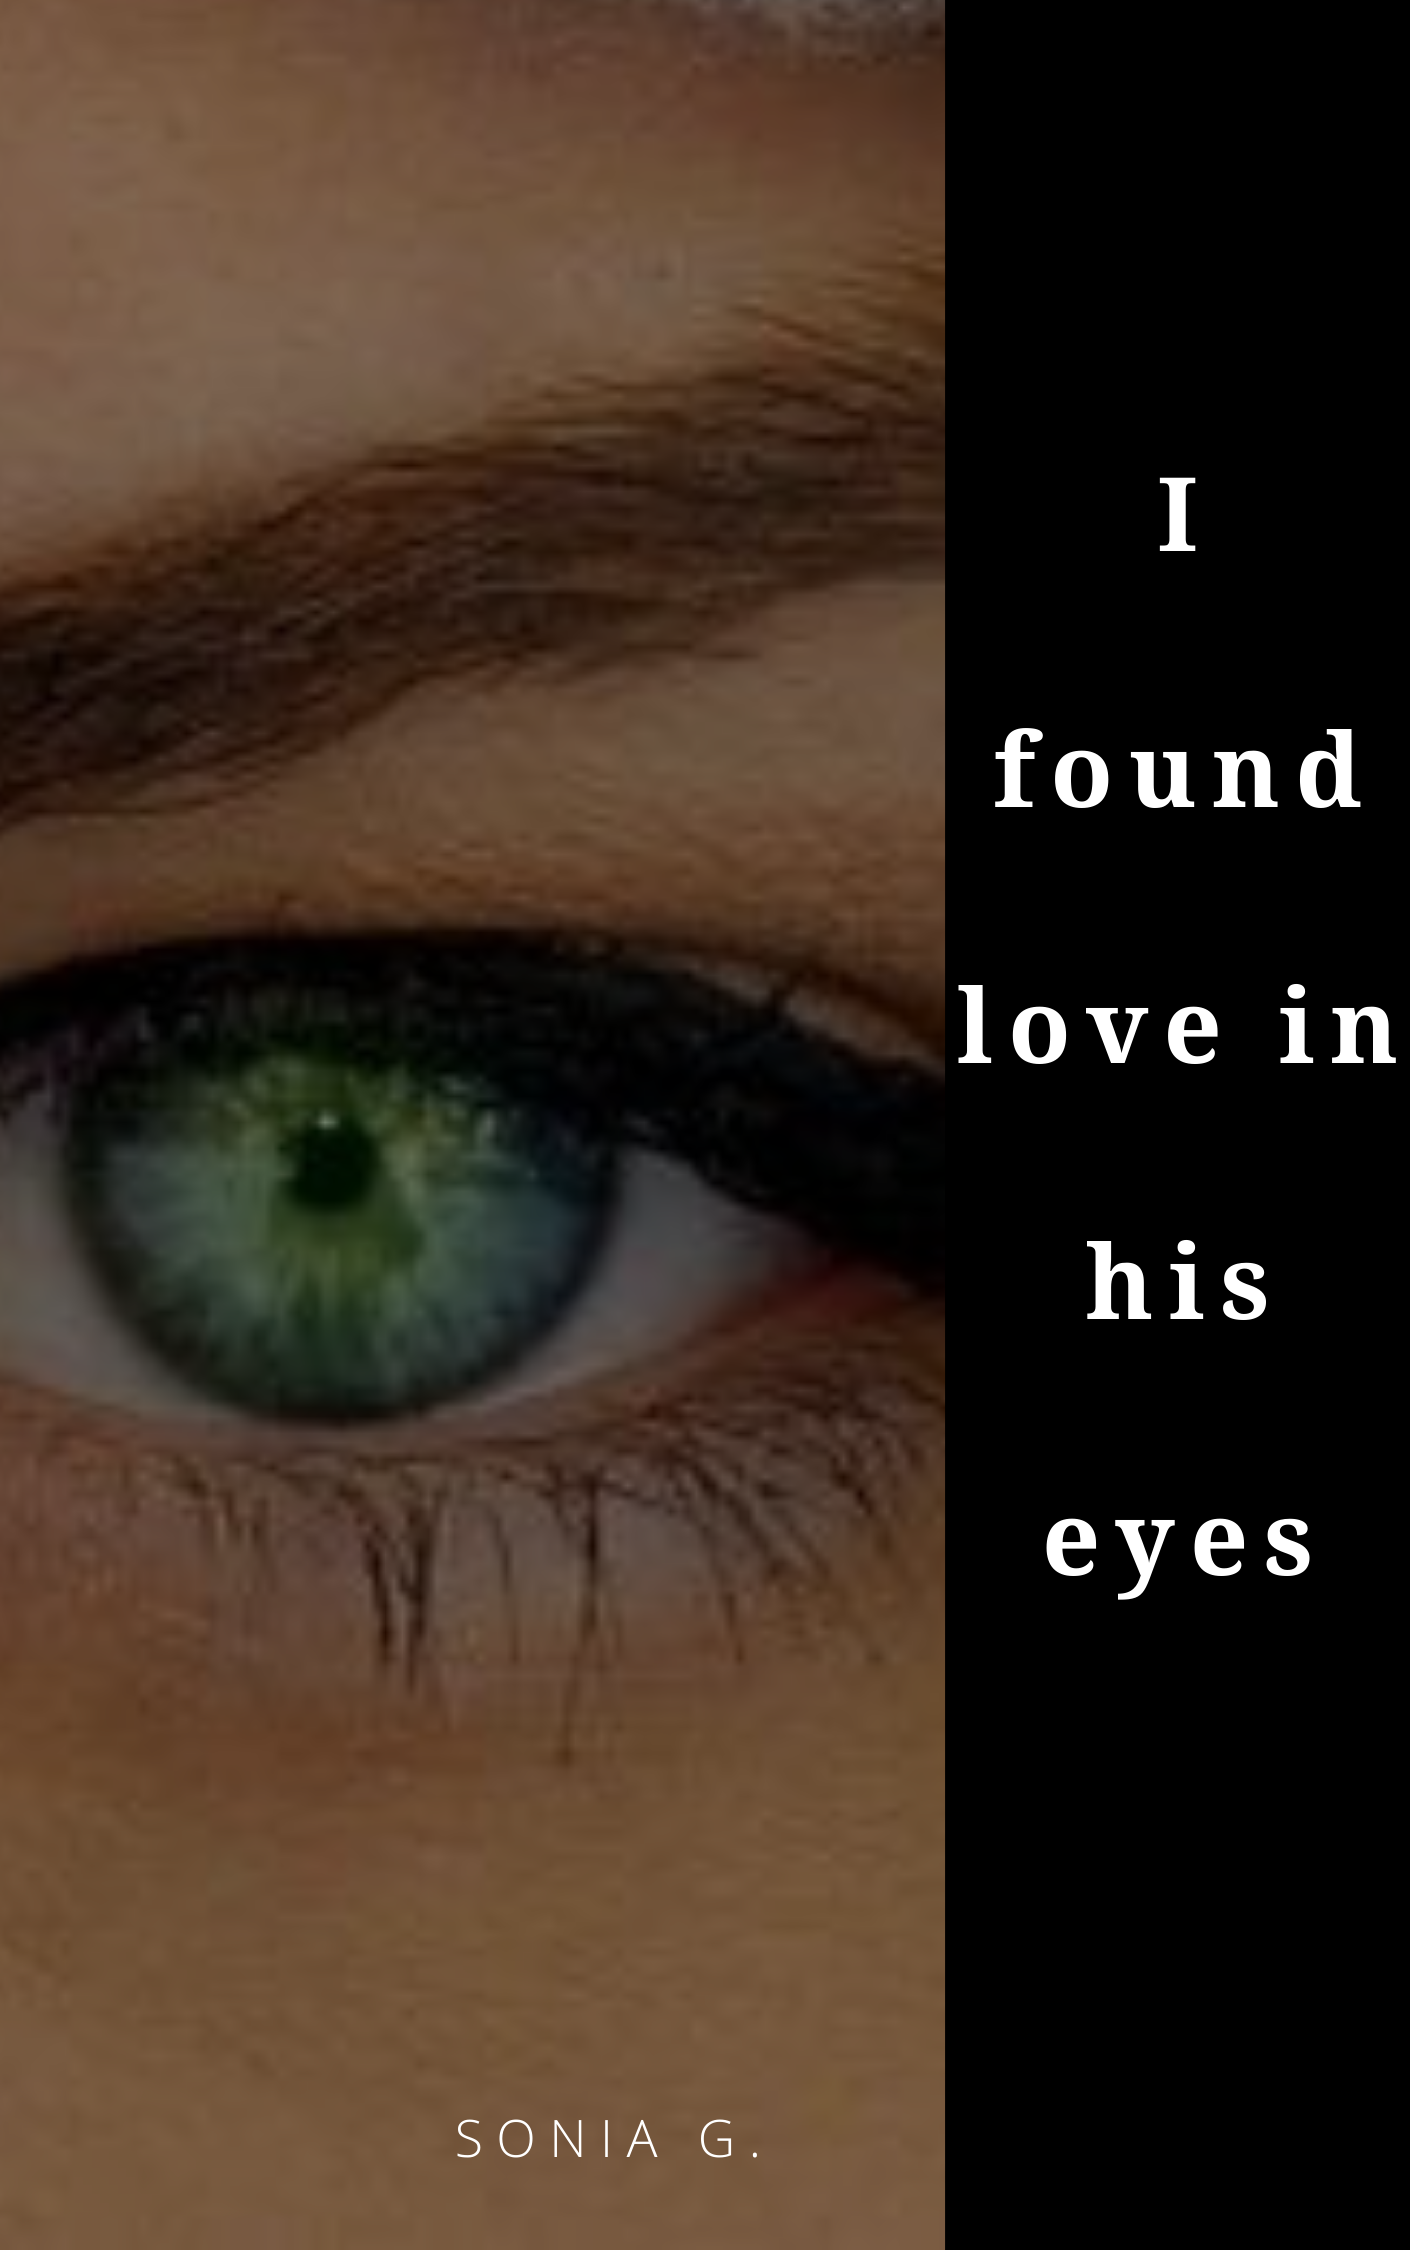 I found love in his eyes